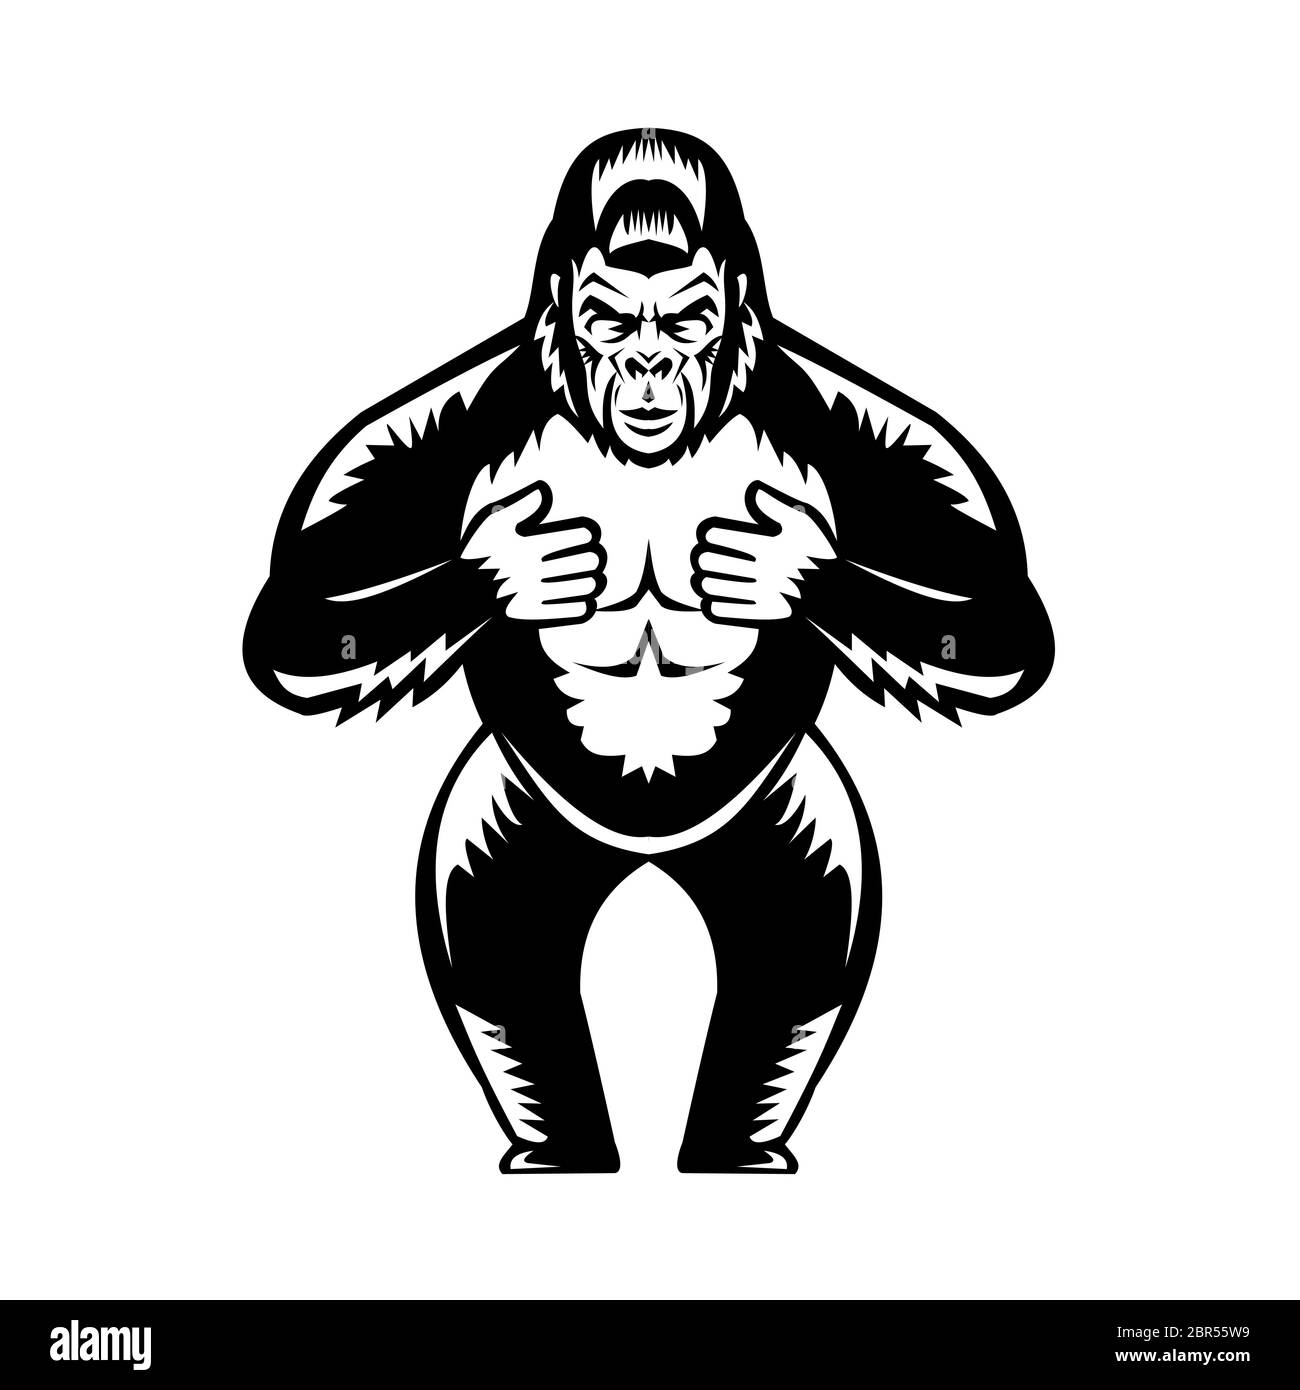 Retro woodcut style illustration of a silverback gorilla  thumping or beating it's chest viewed from front on isolated background done in black and wh Stock Photo